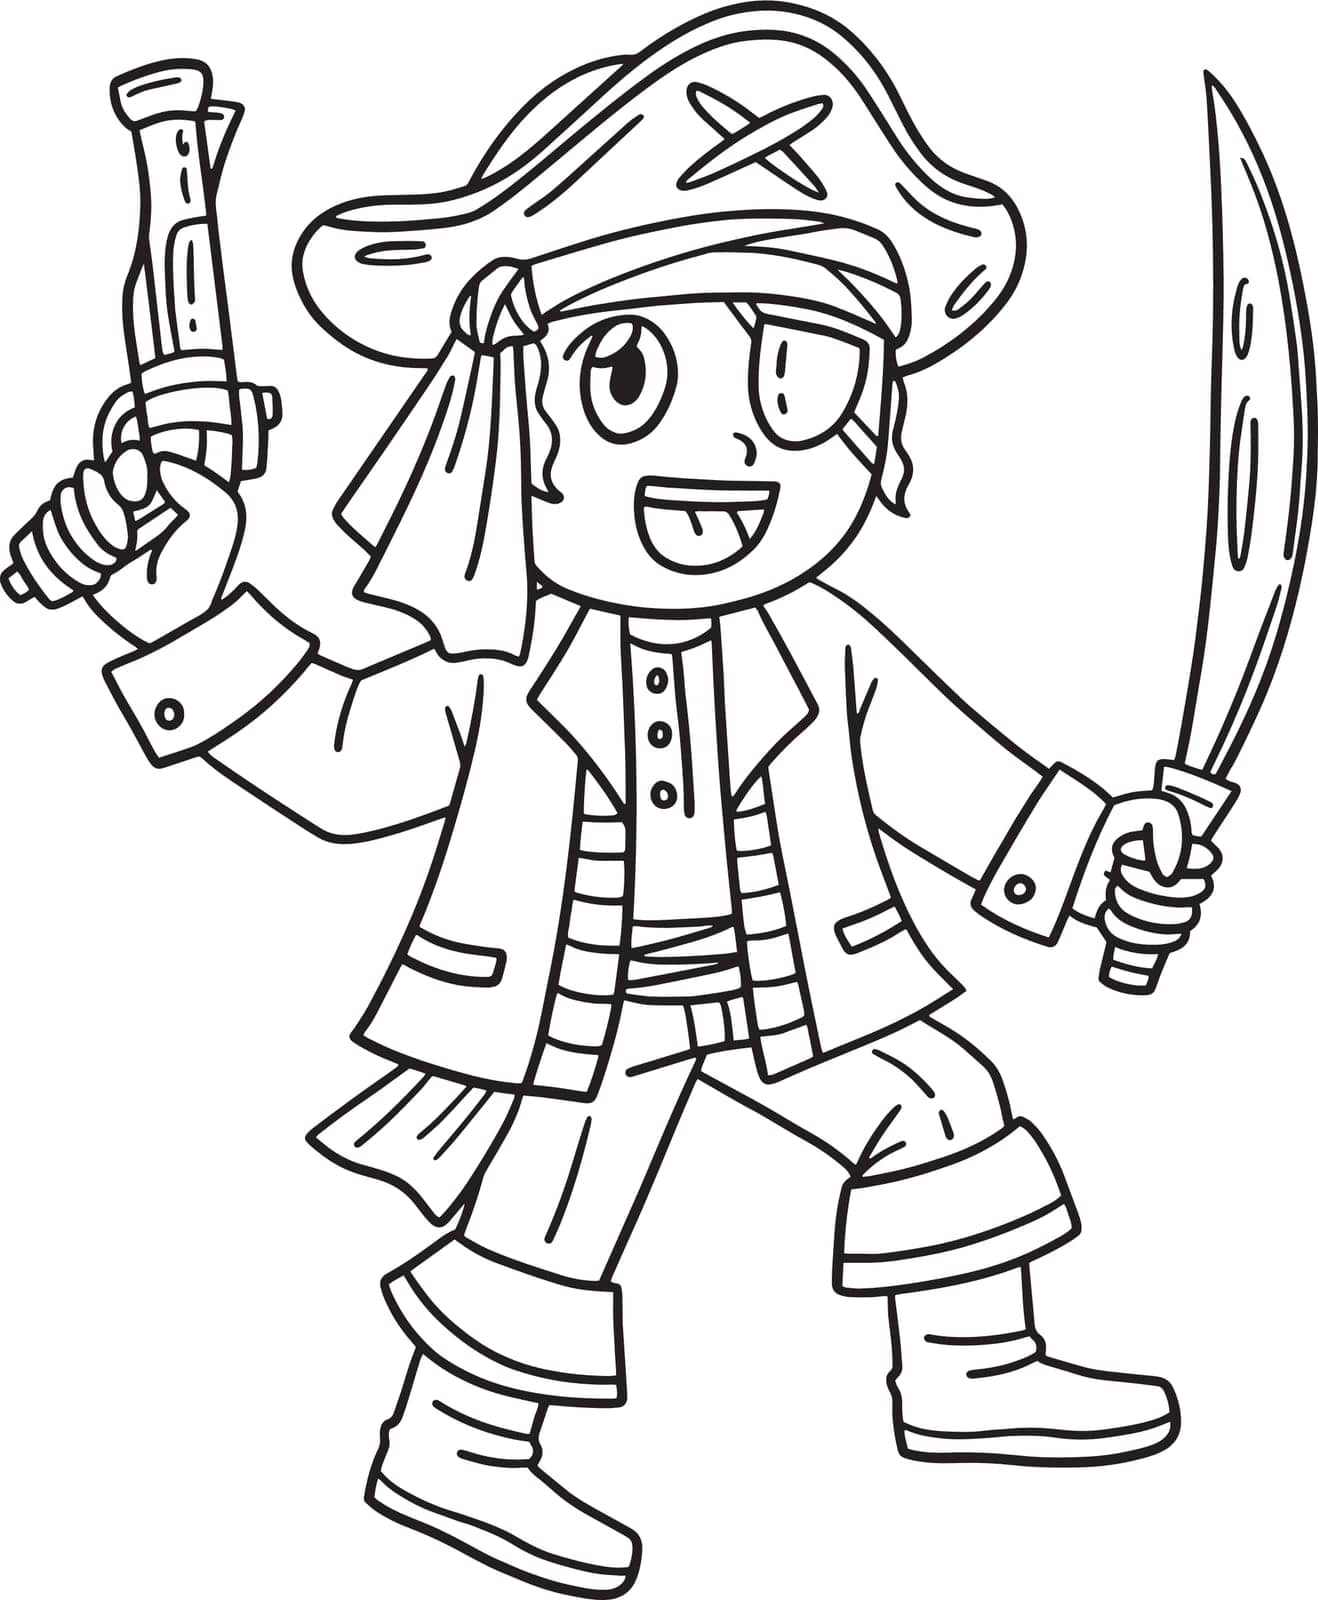 A cute and funny coloring page of a Pirate with a Gun and Cutlass. Provides hours of coloring fun for children. Color, this page is very easy. Suitable for little kids and toddlers.